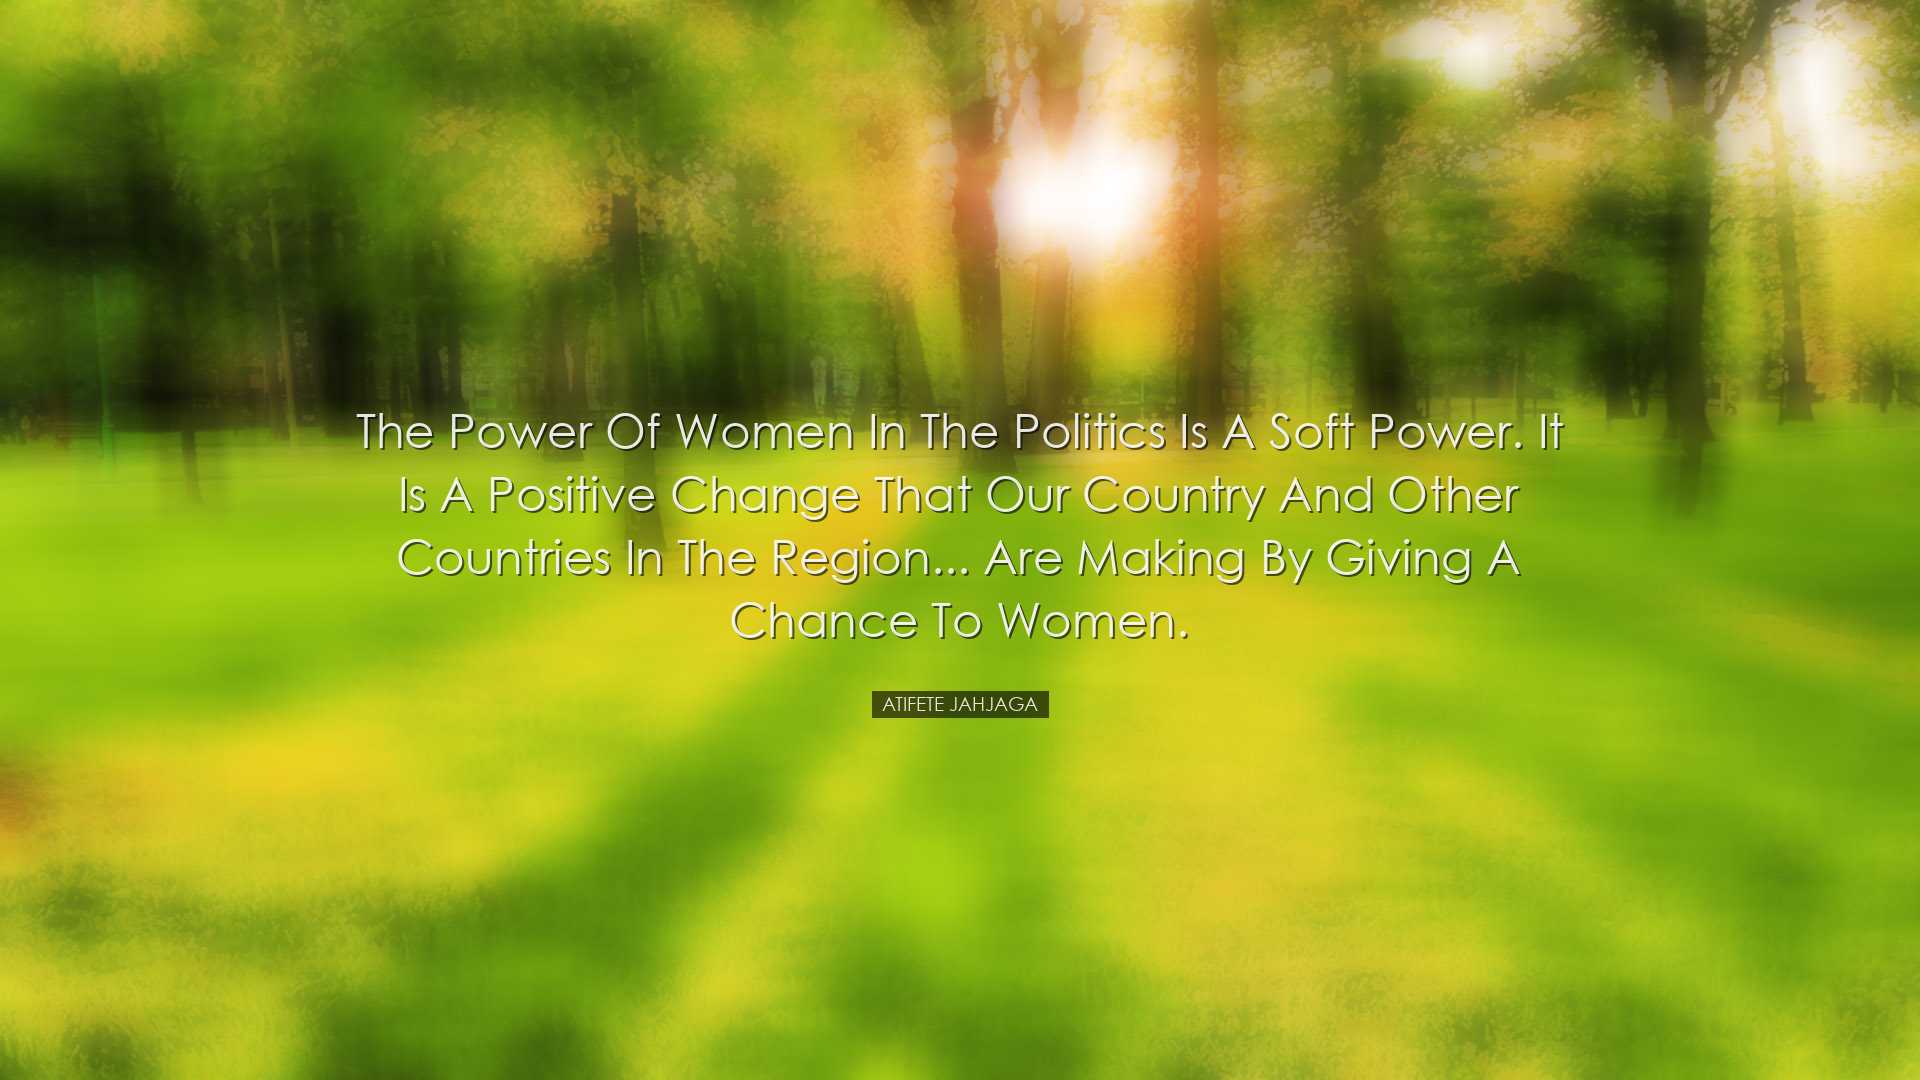 The power of women in the politics is a soft power. It is a positi